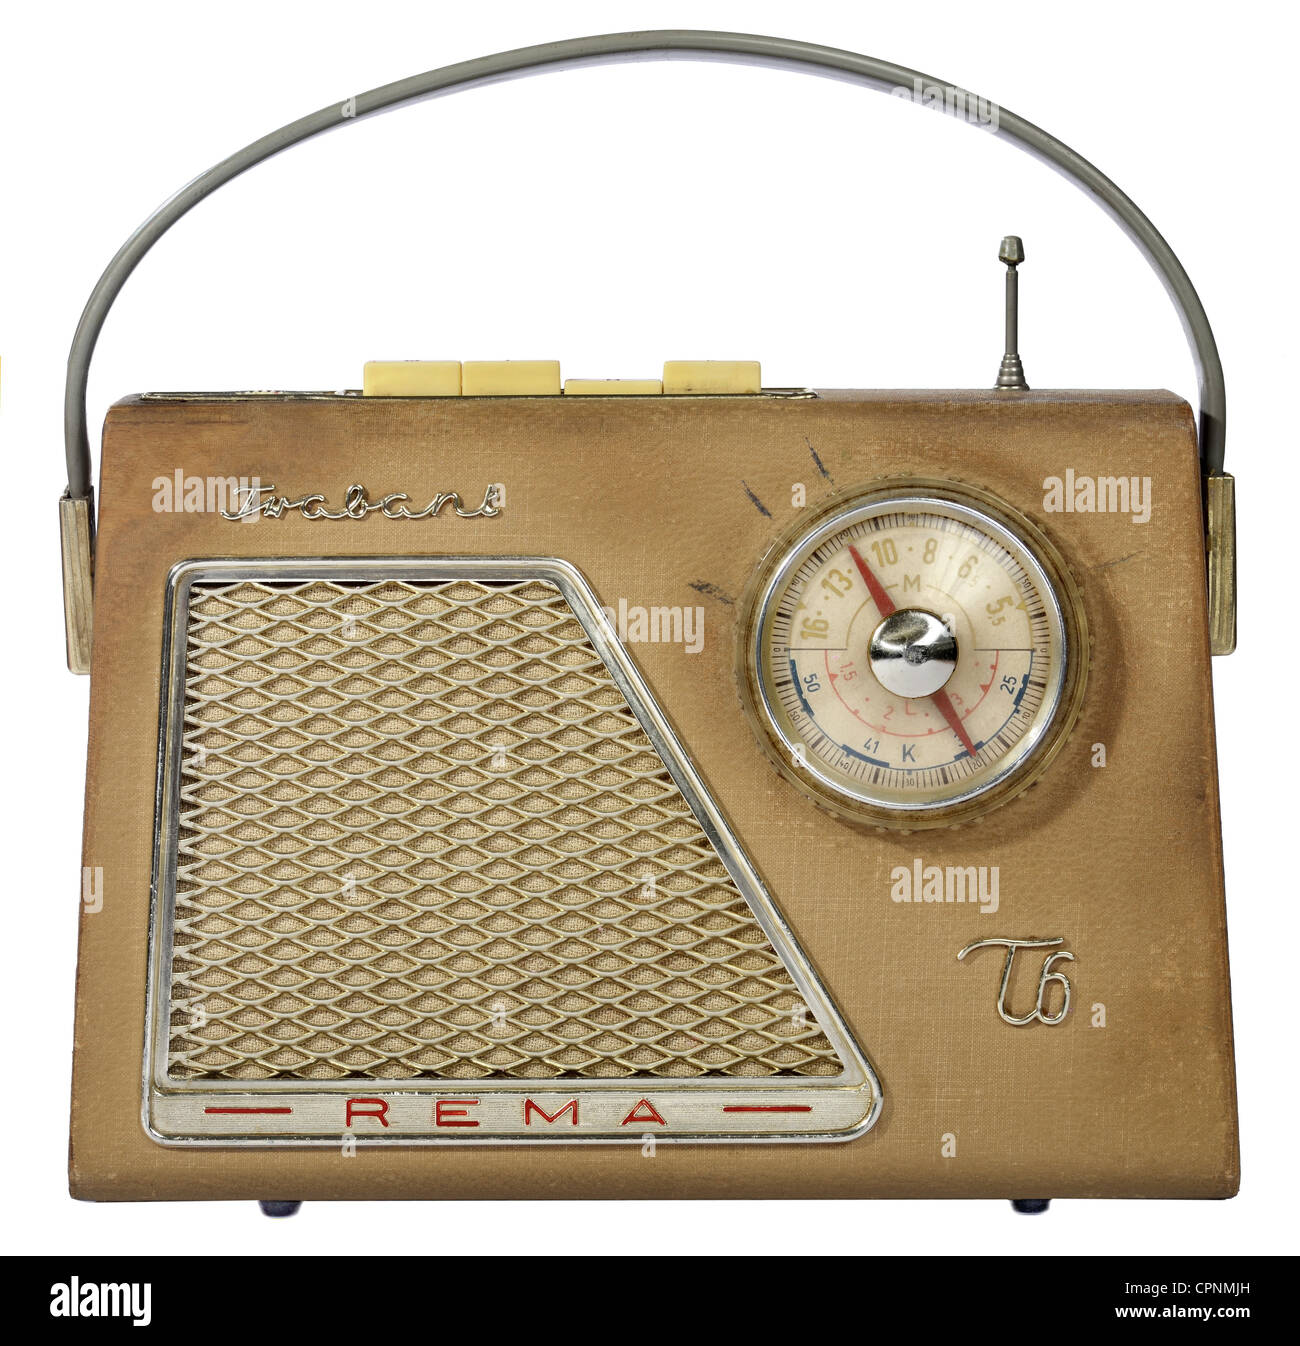 broadcast, radio, portable radio Rema 'Trabant T6', device is weighing 1.8kg, made by: Rema, Stollberg, Saxony, East-Germany, 1961, Additional-Rights-Clearences-Not Available Stock Photo